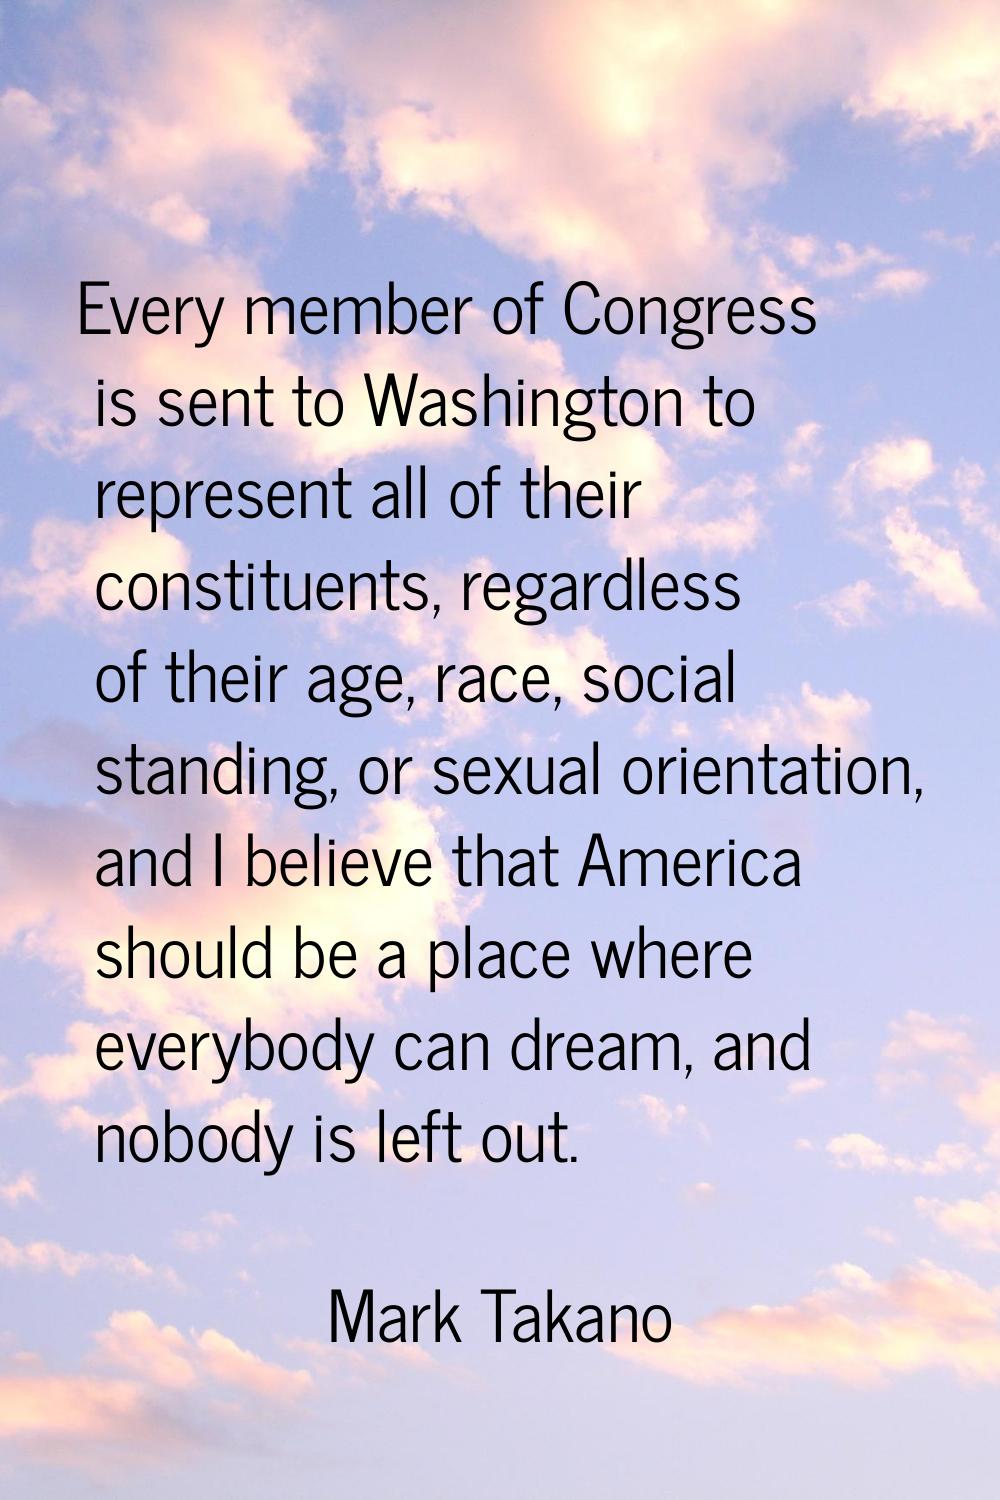 Every member of Congress is sent to Washington to represent all of their constituents, regardless o